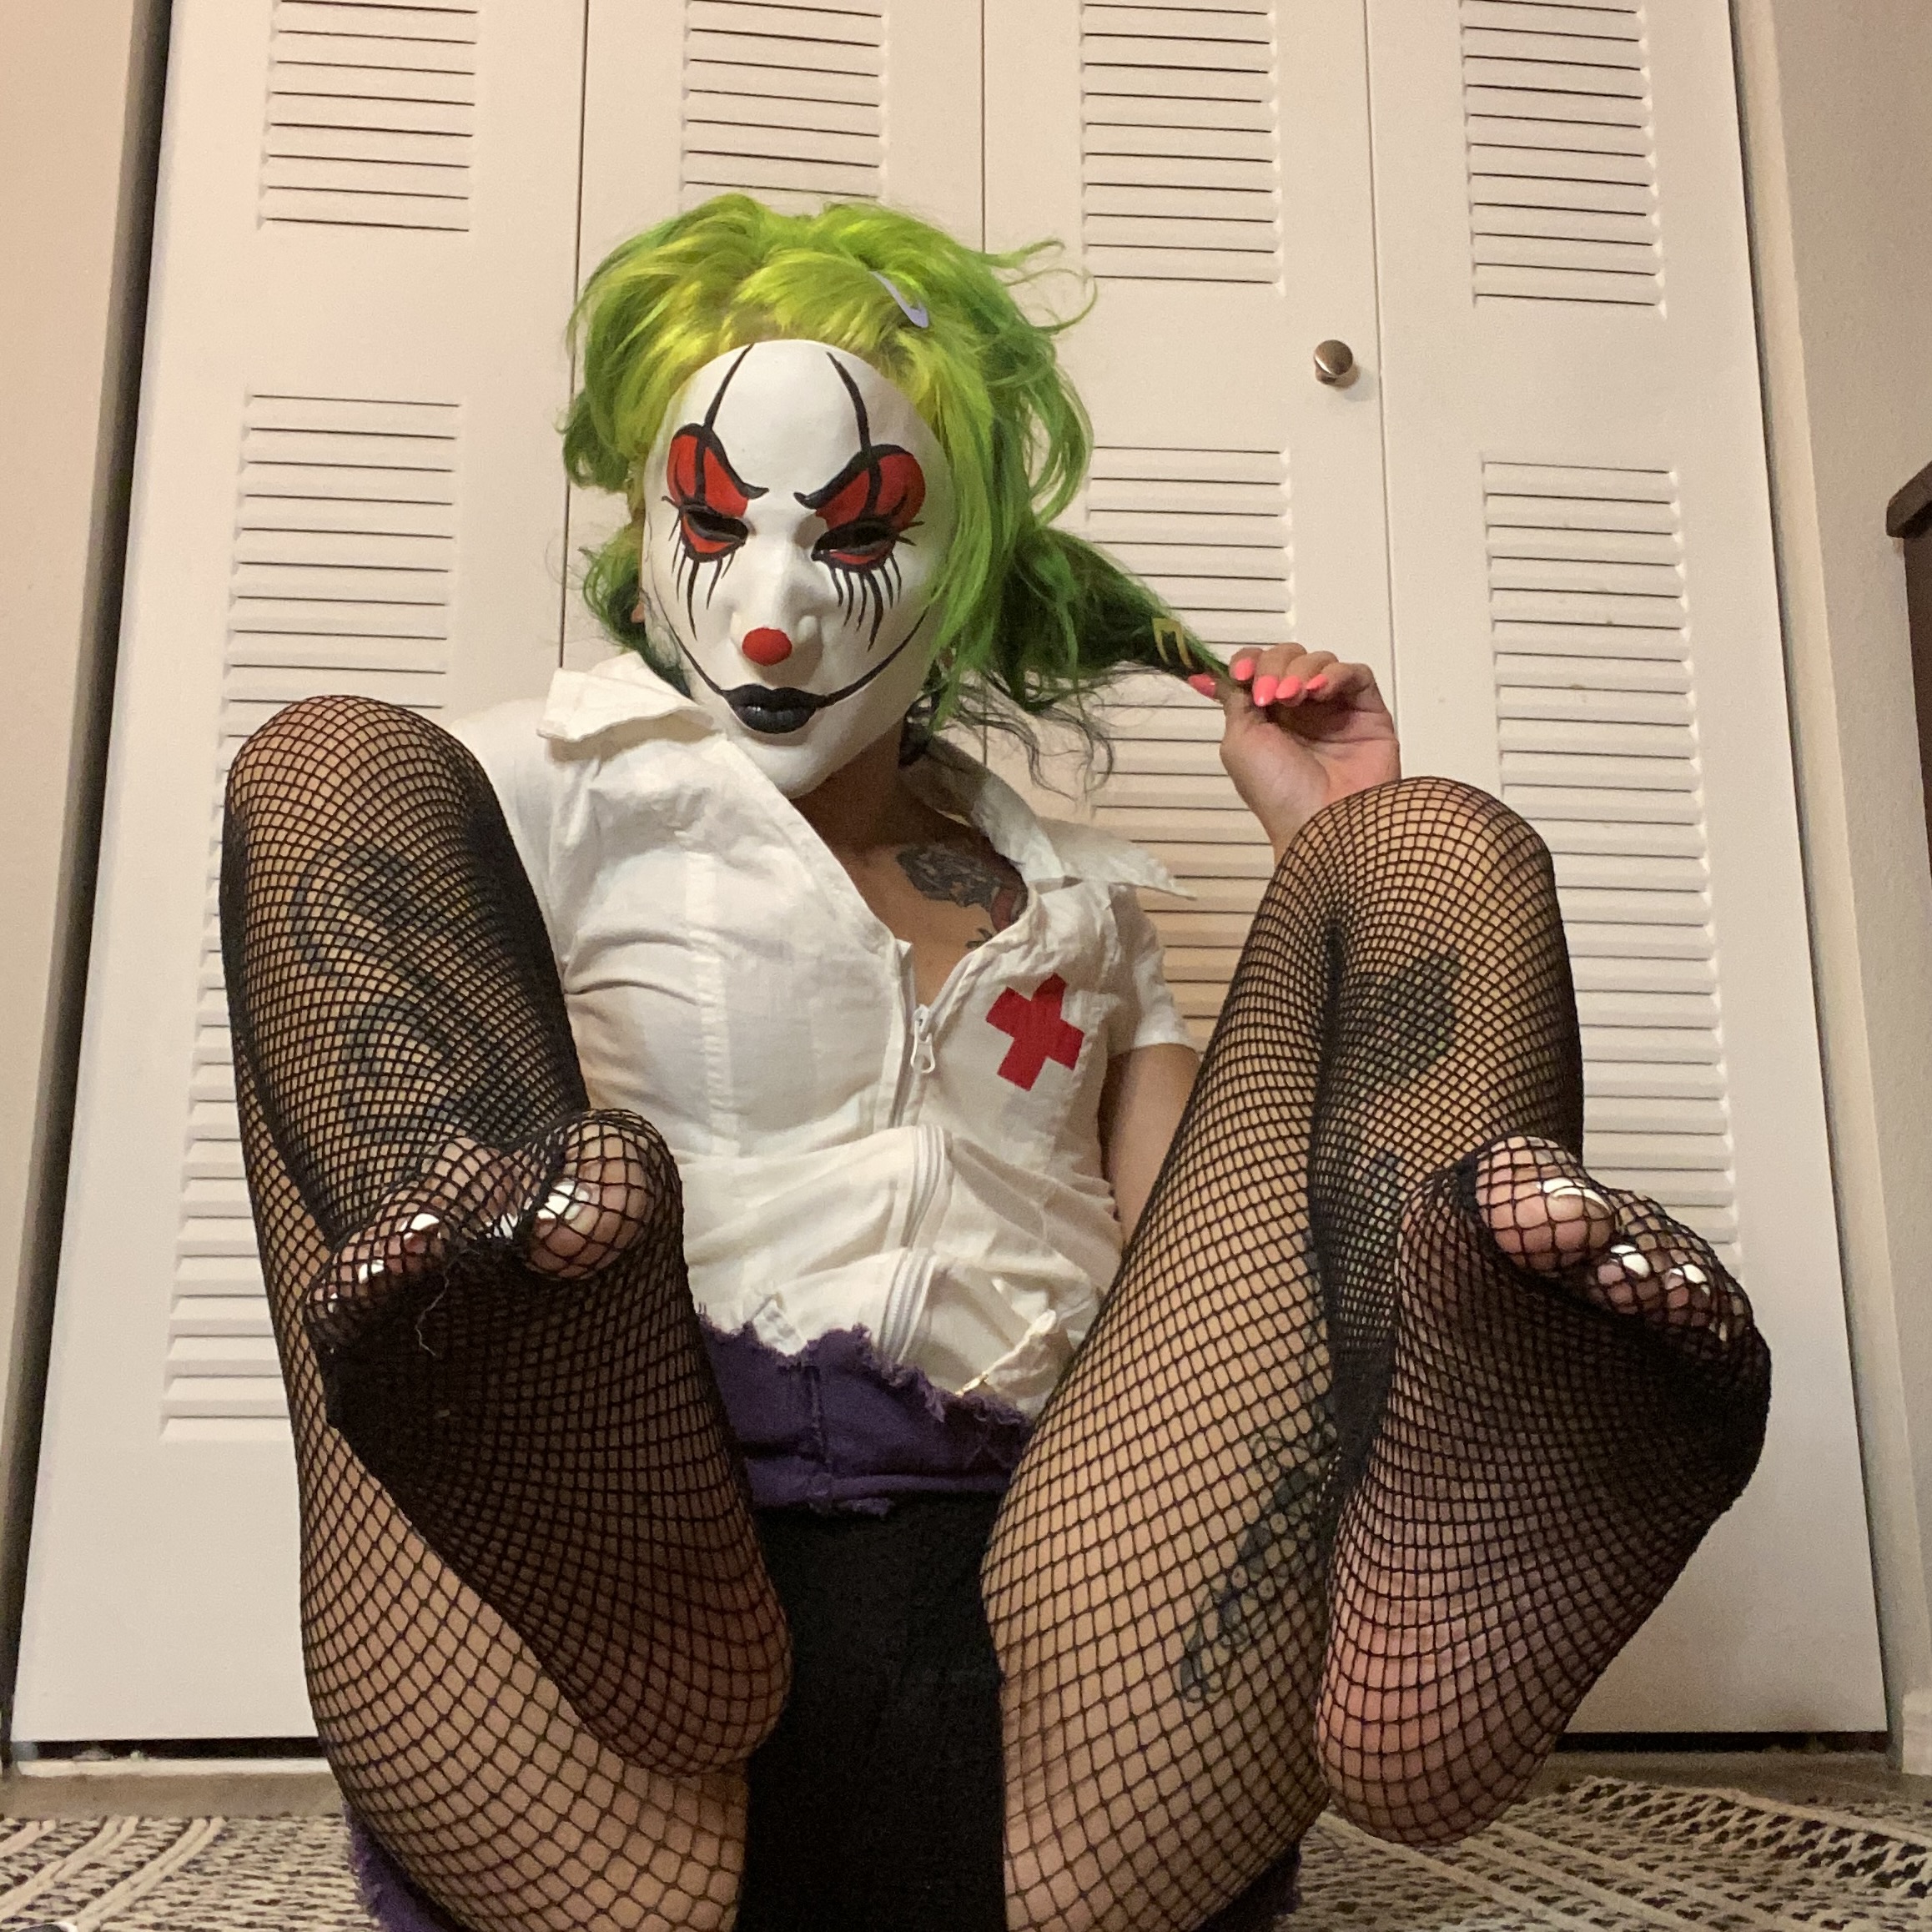 Evil Scary Clown Porn - Clown Videos, Photos And Other Content and Other Amateur Porn Content on ELM